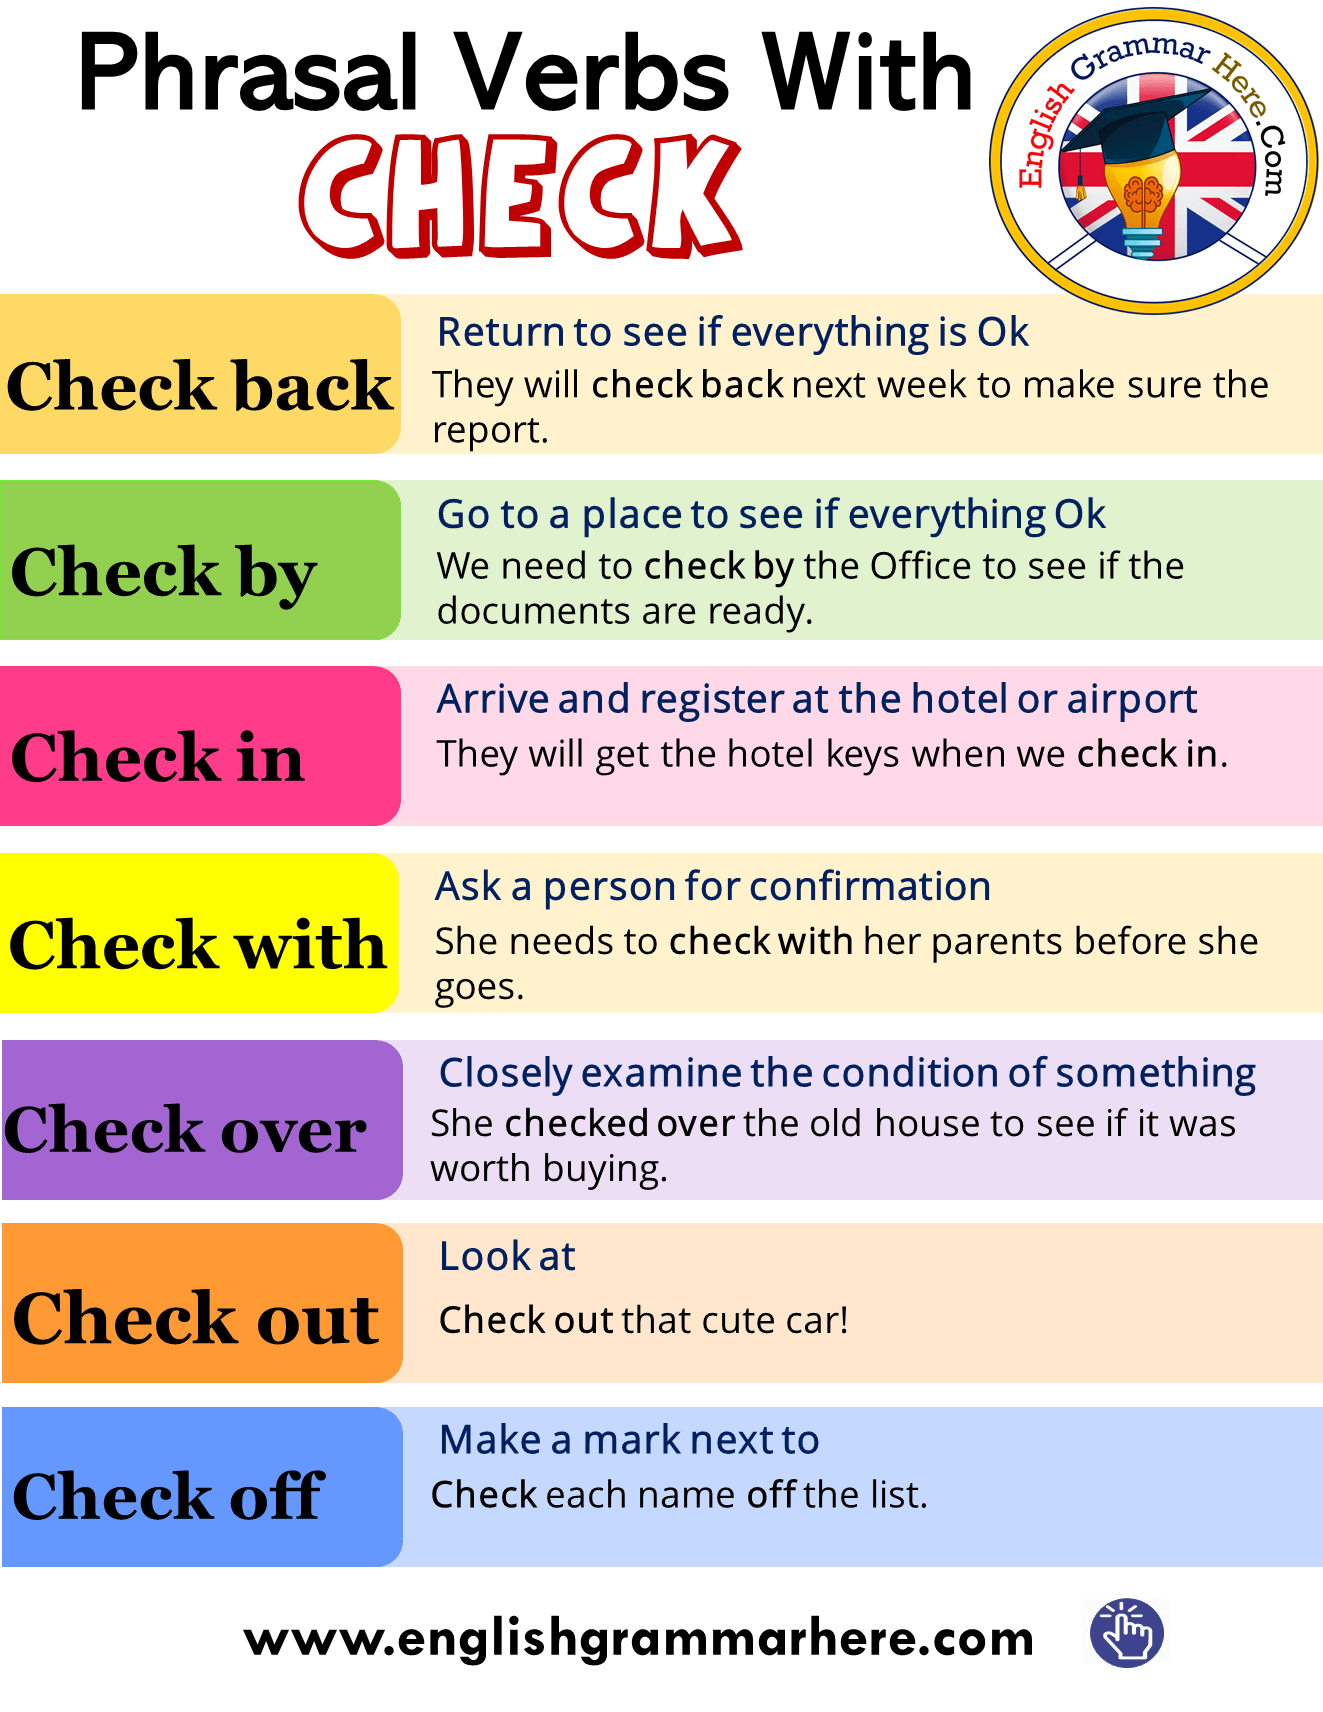 Phrasal Verbs With CHECK in English